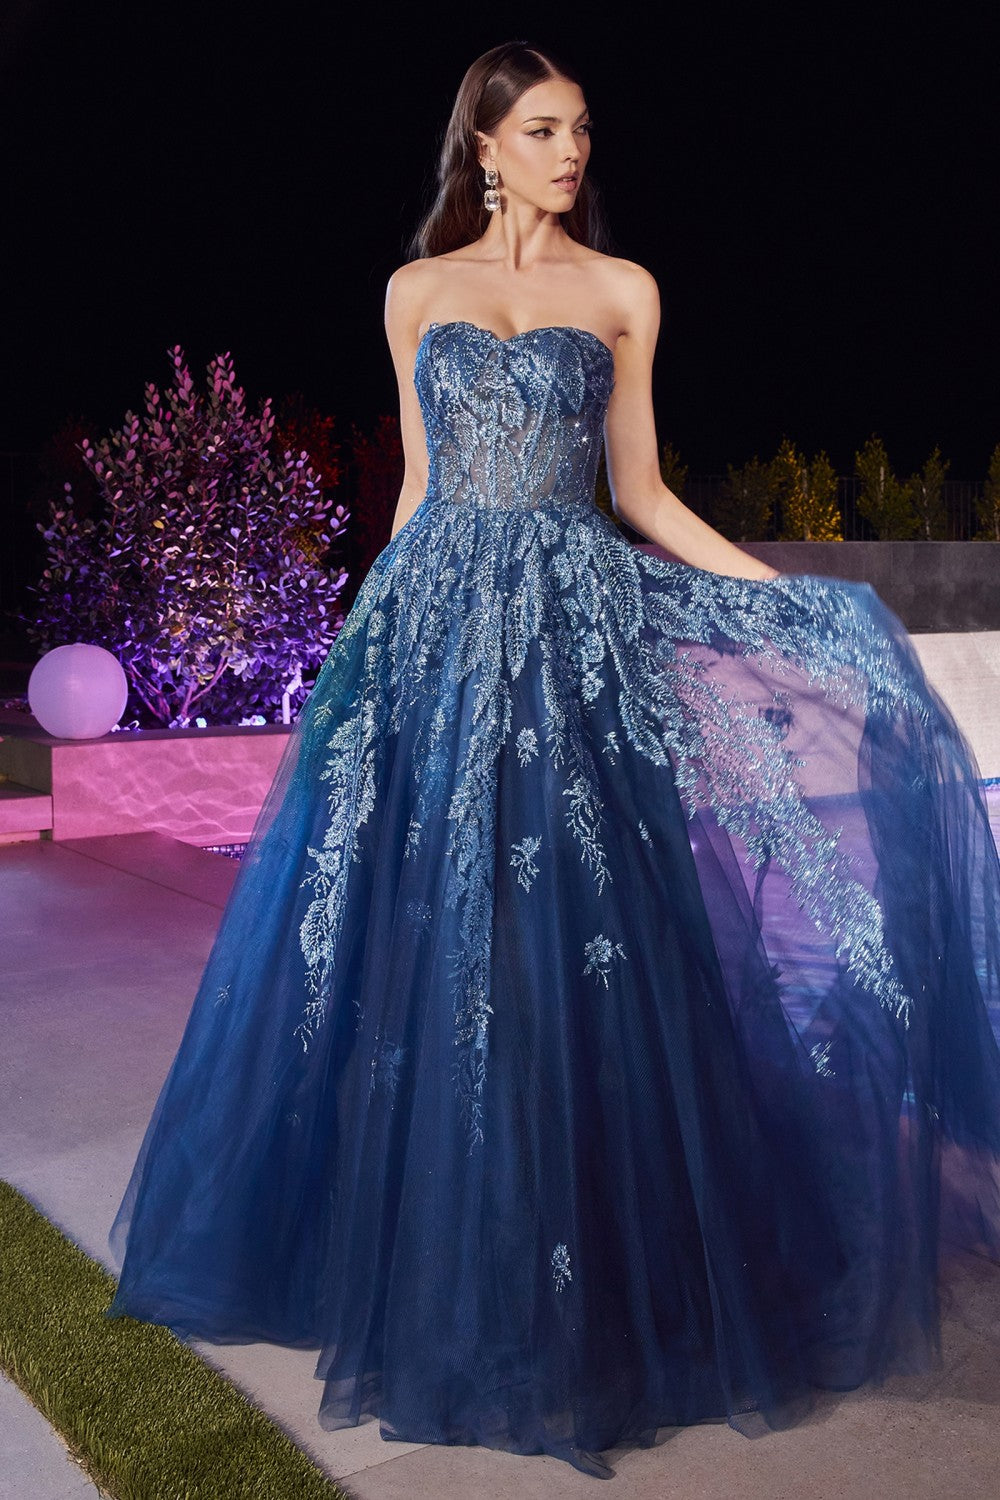 Lapis-blue Strapless Layered Tulle Ball Gown J852 - Women Evening Formal Gown - Special Occasion